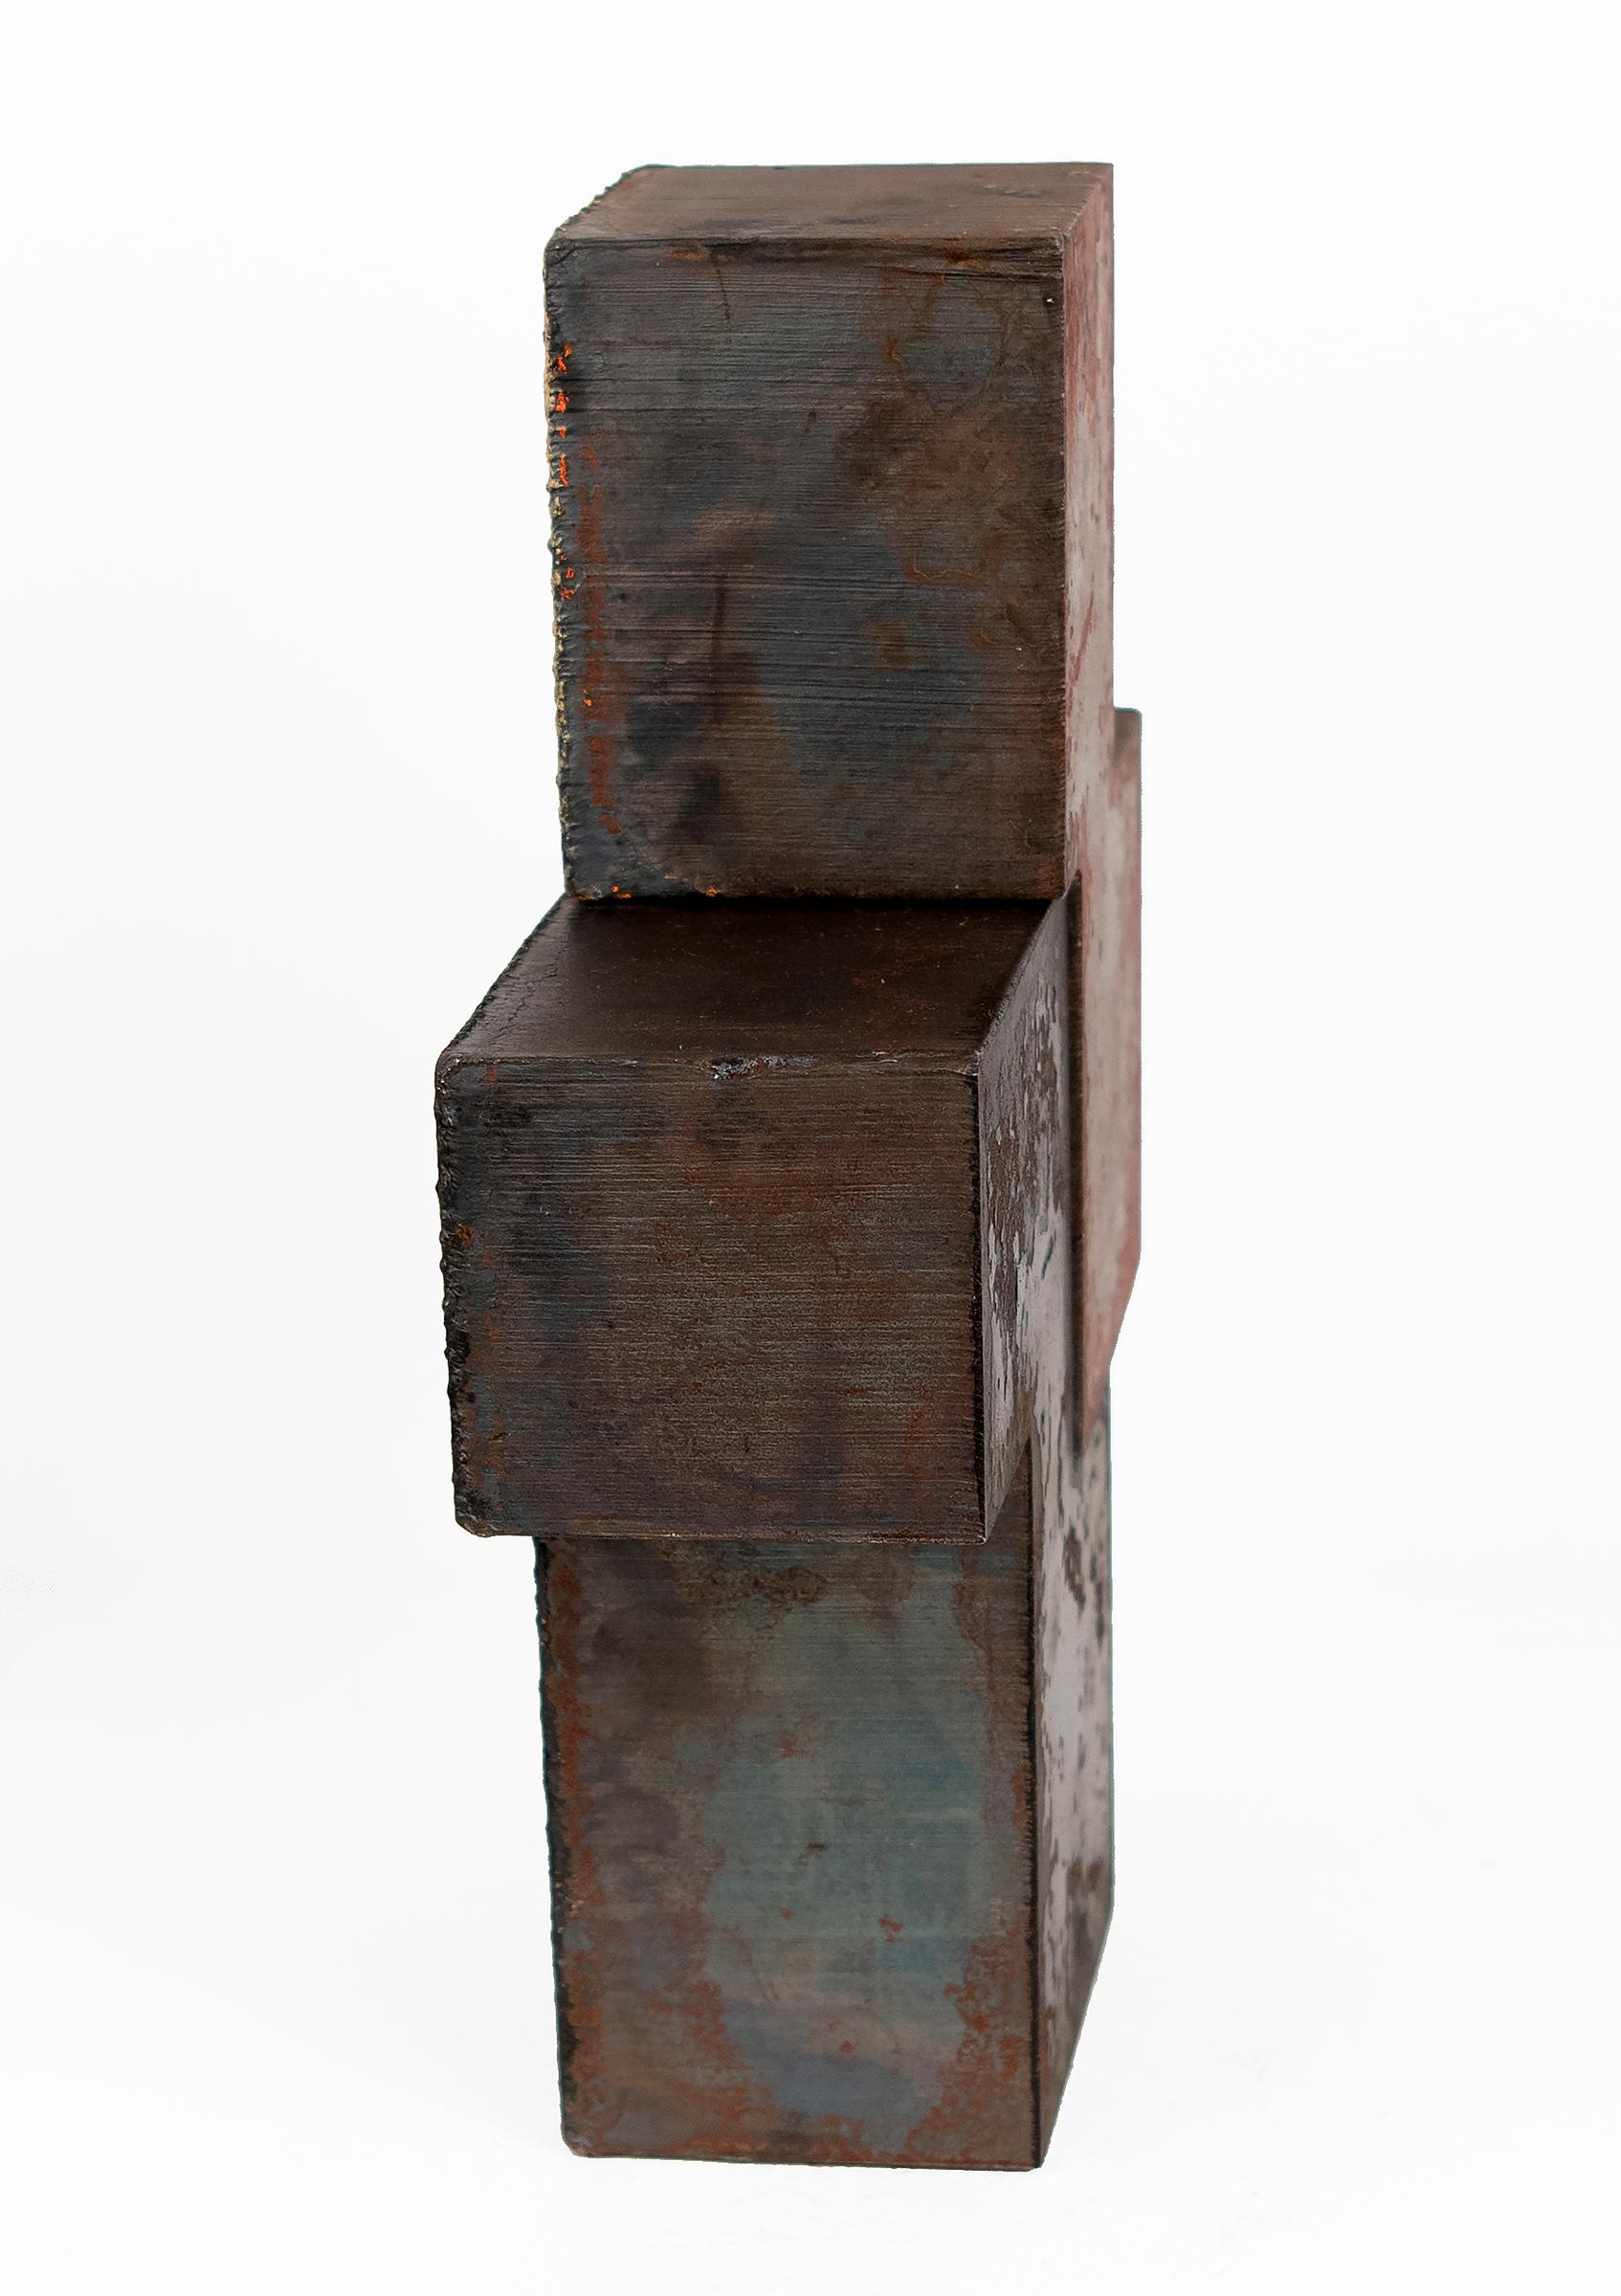 Jonathan Waters received his MFA from Yale University in 1977. While living in NYC, he was an assistant to sculptors Mark di Suvero, Charles Ginnever and Richard Serra. Waters has exhibited extensively throughout the Northeast. Recent large- scale